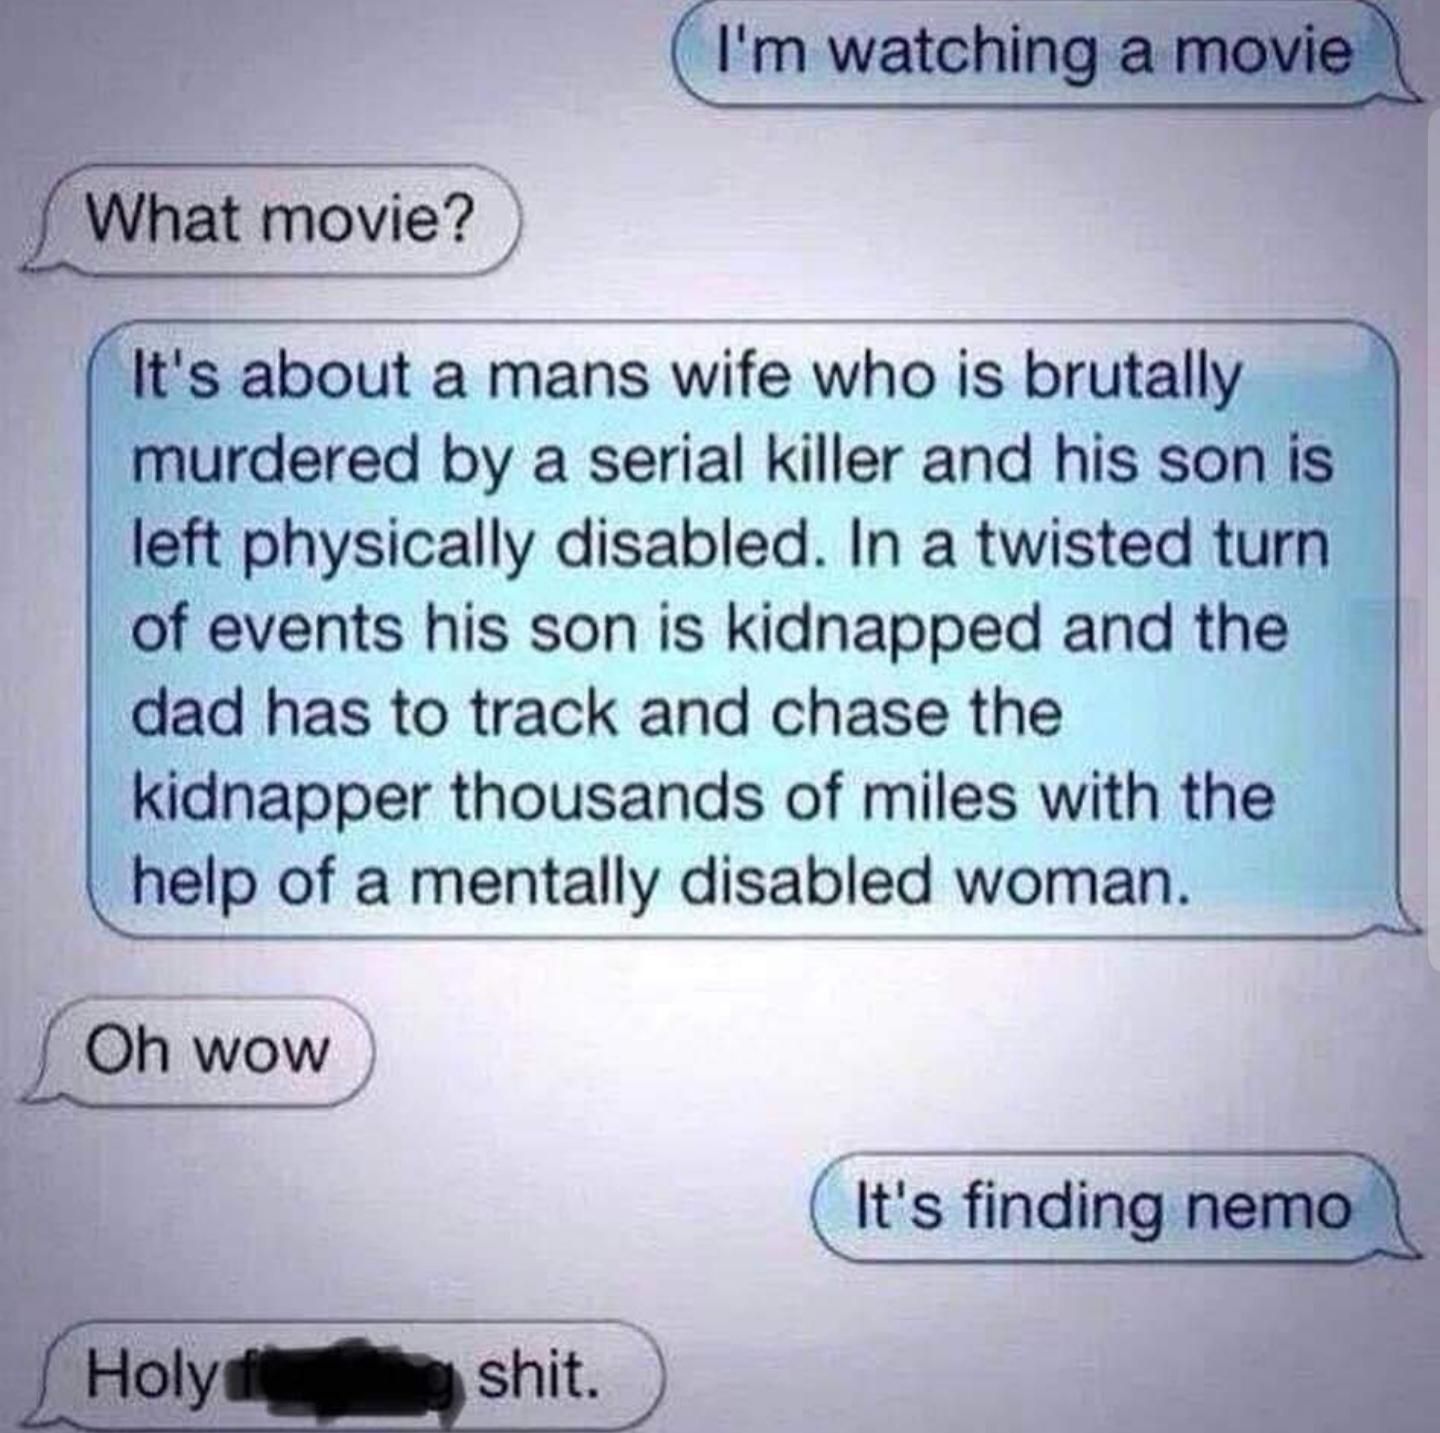 Who watches these kind of movies?